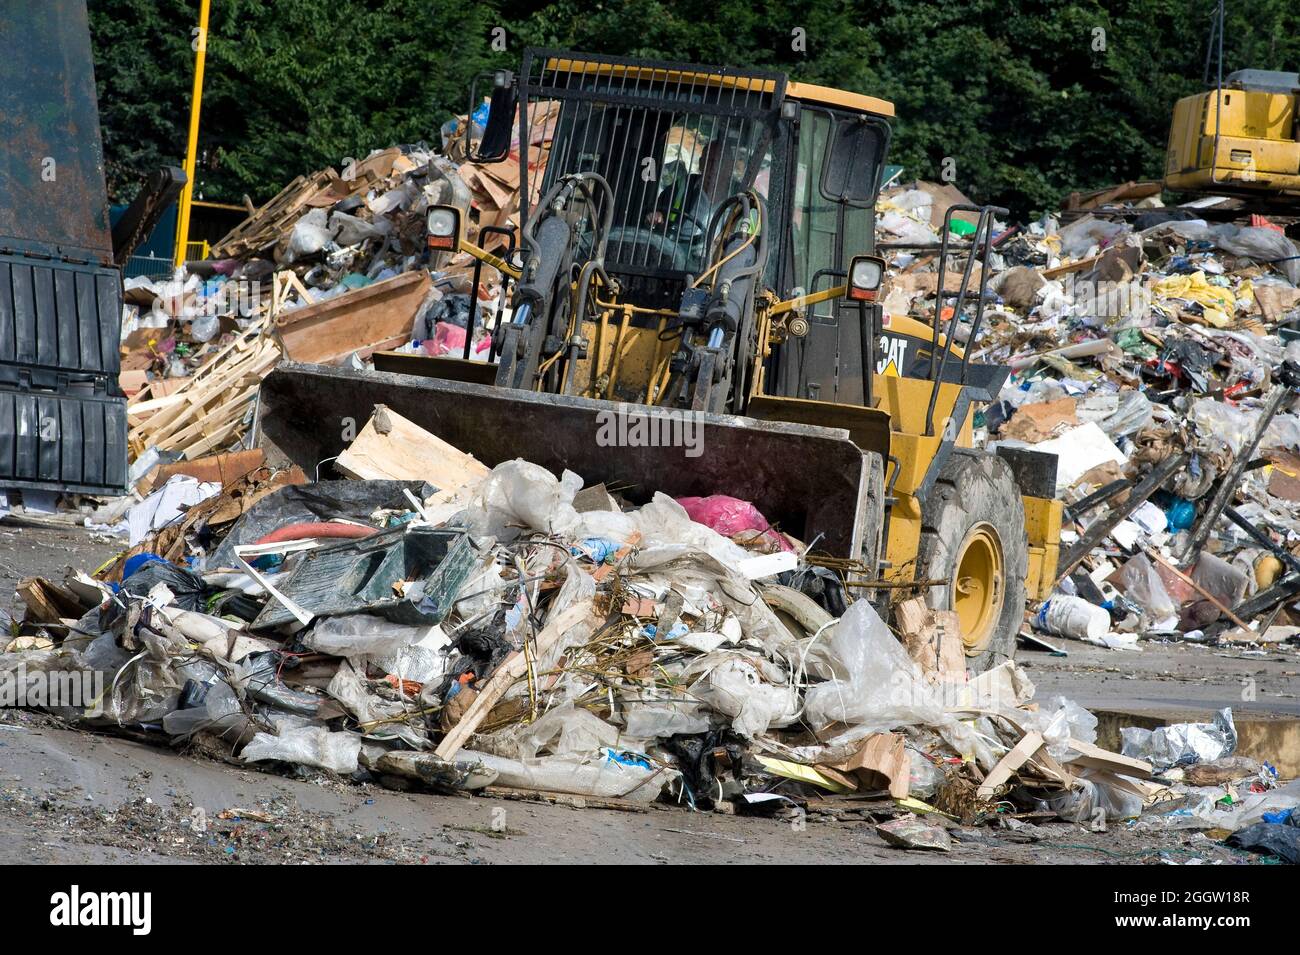 Cat wheel dozer working at a materials recycling facility in the UK. Stock Photo